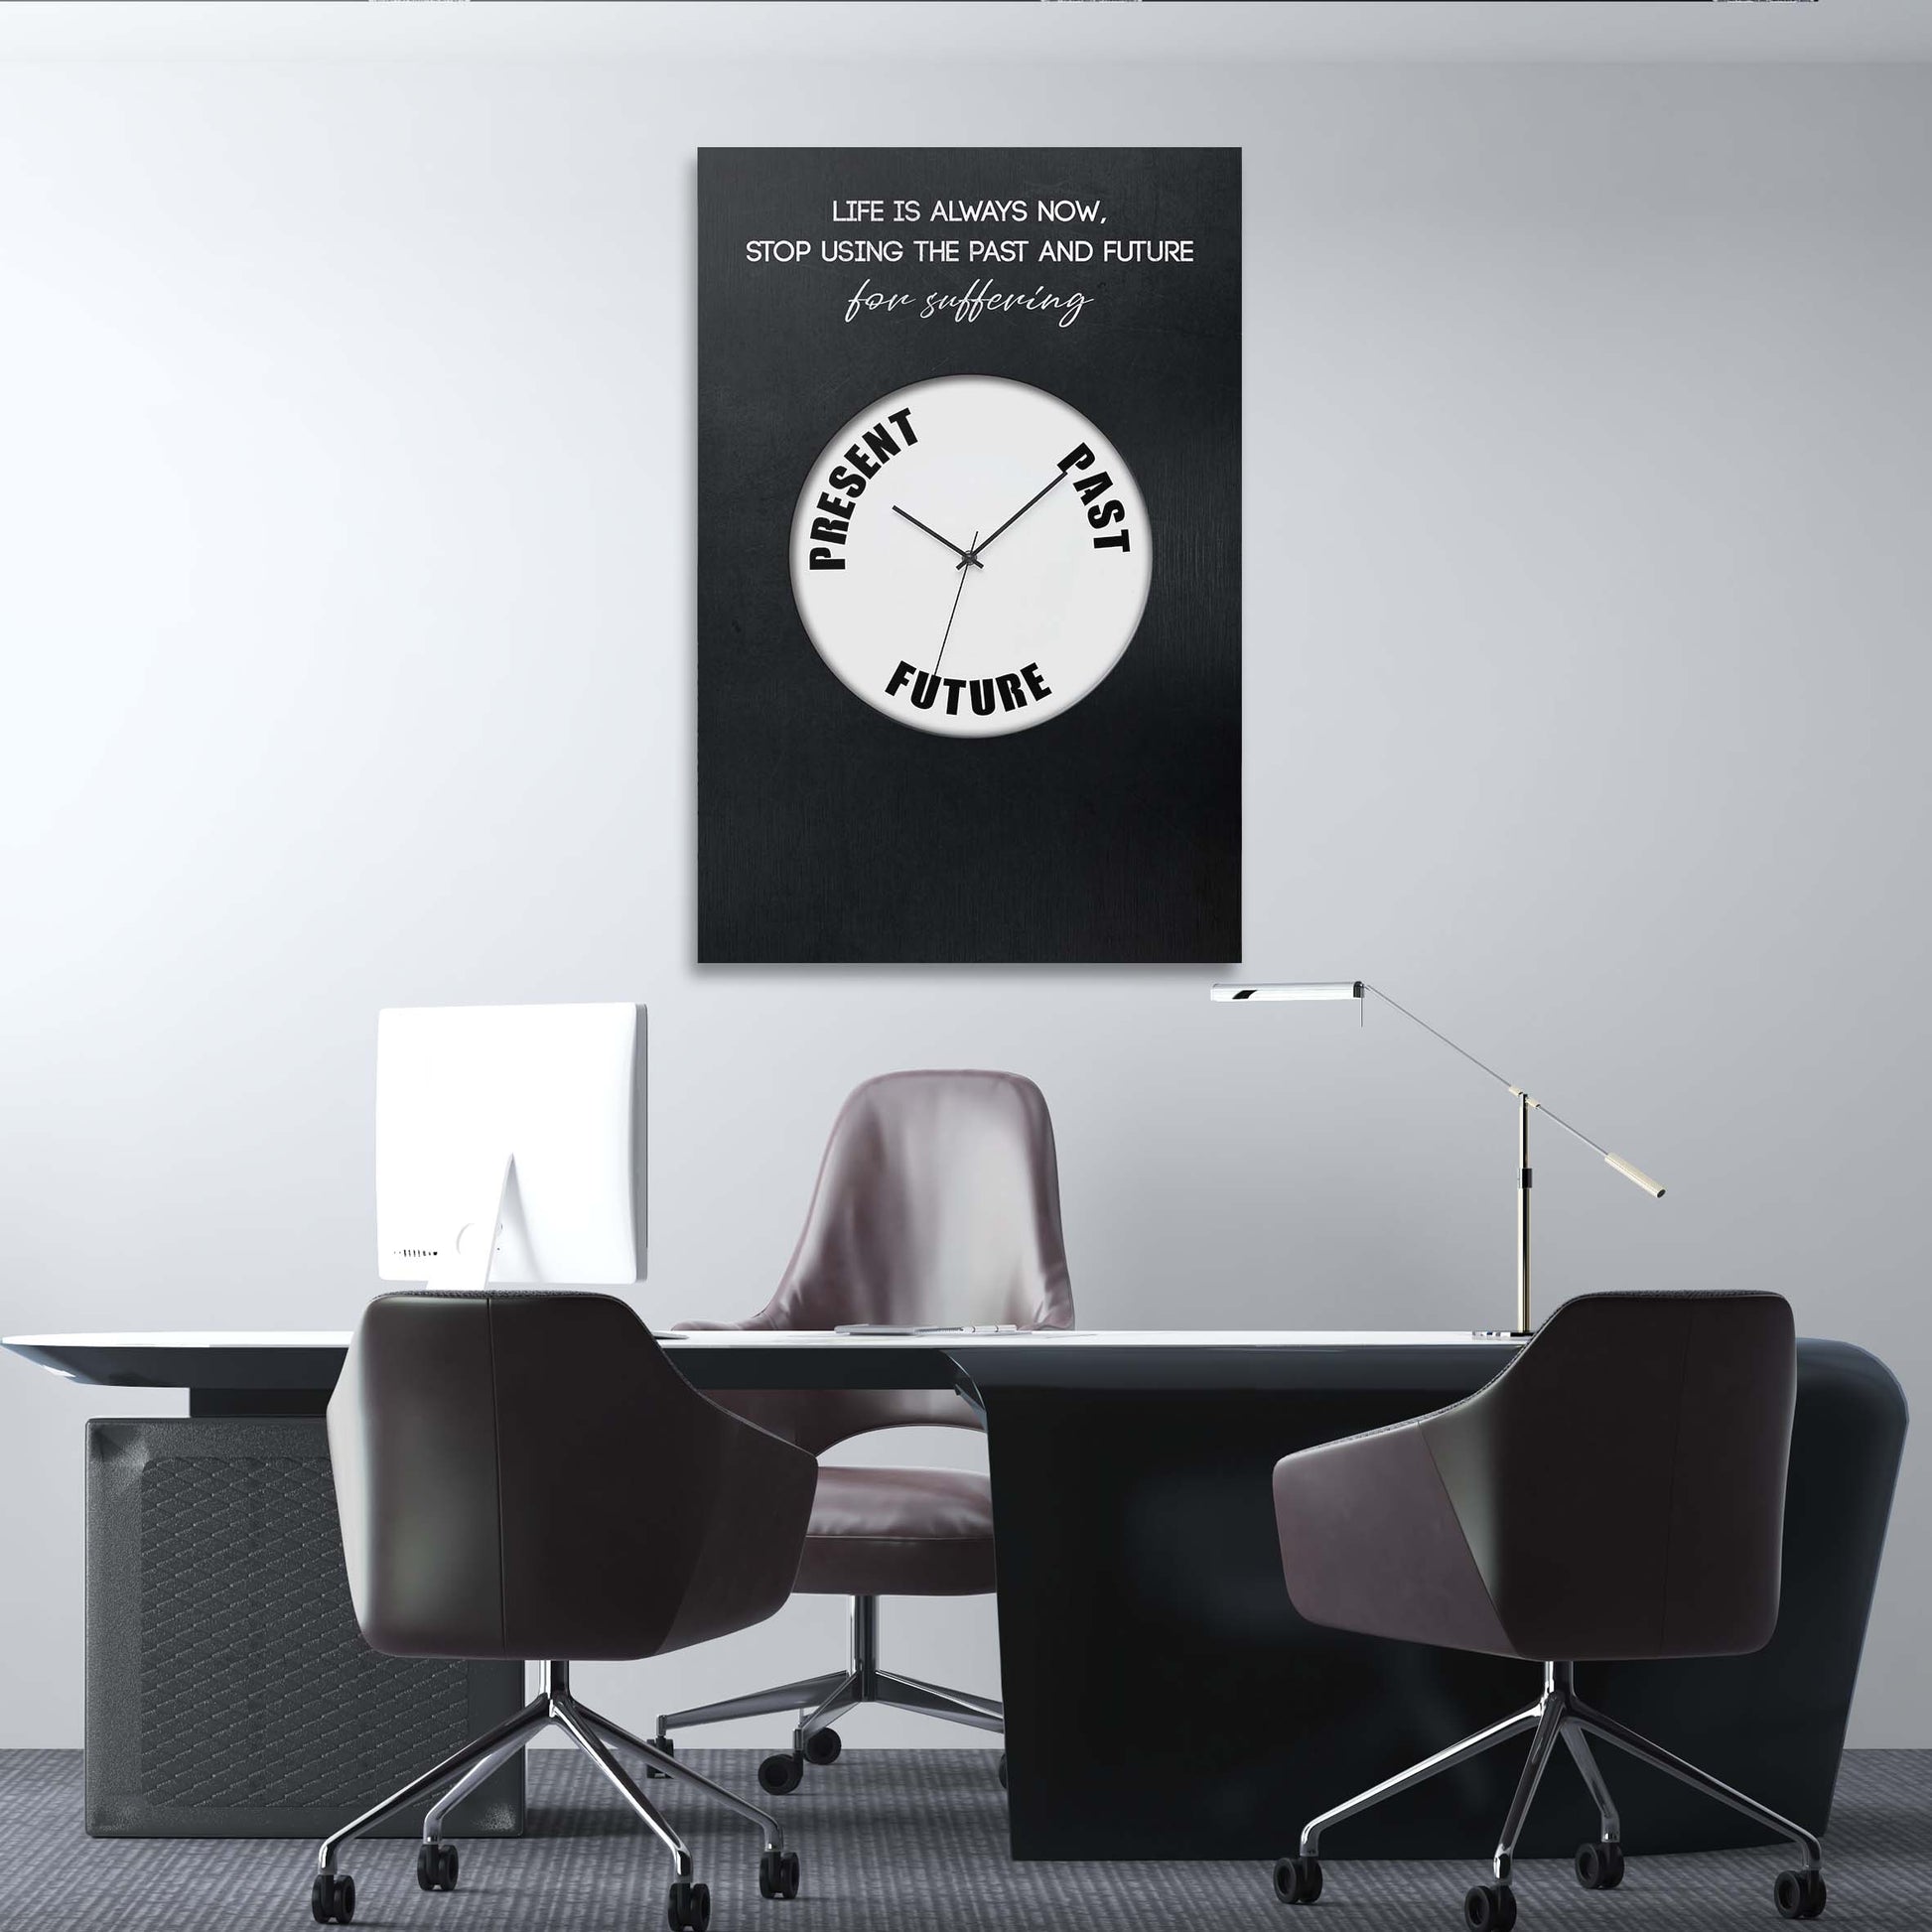 Life is always now Wall Art | Inspirational Wall Art Motivational Wall Art Quotes Office Art | ImpaktMaker Exclusive Canvas Art Portrait